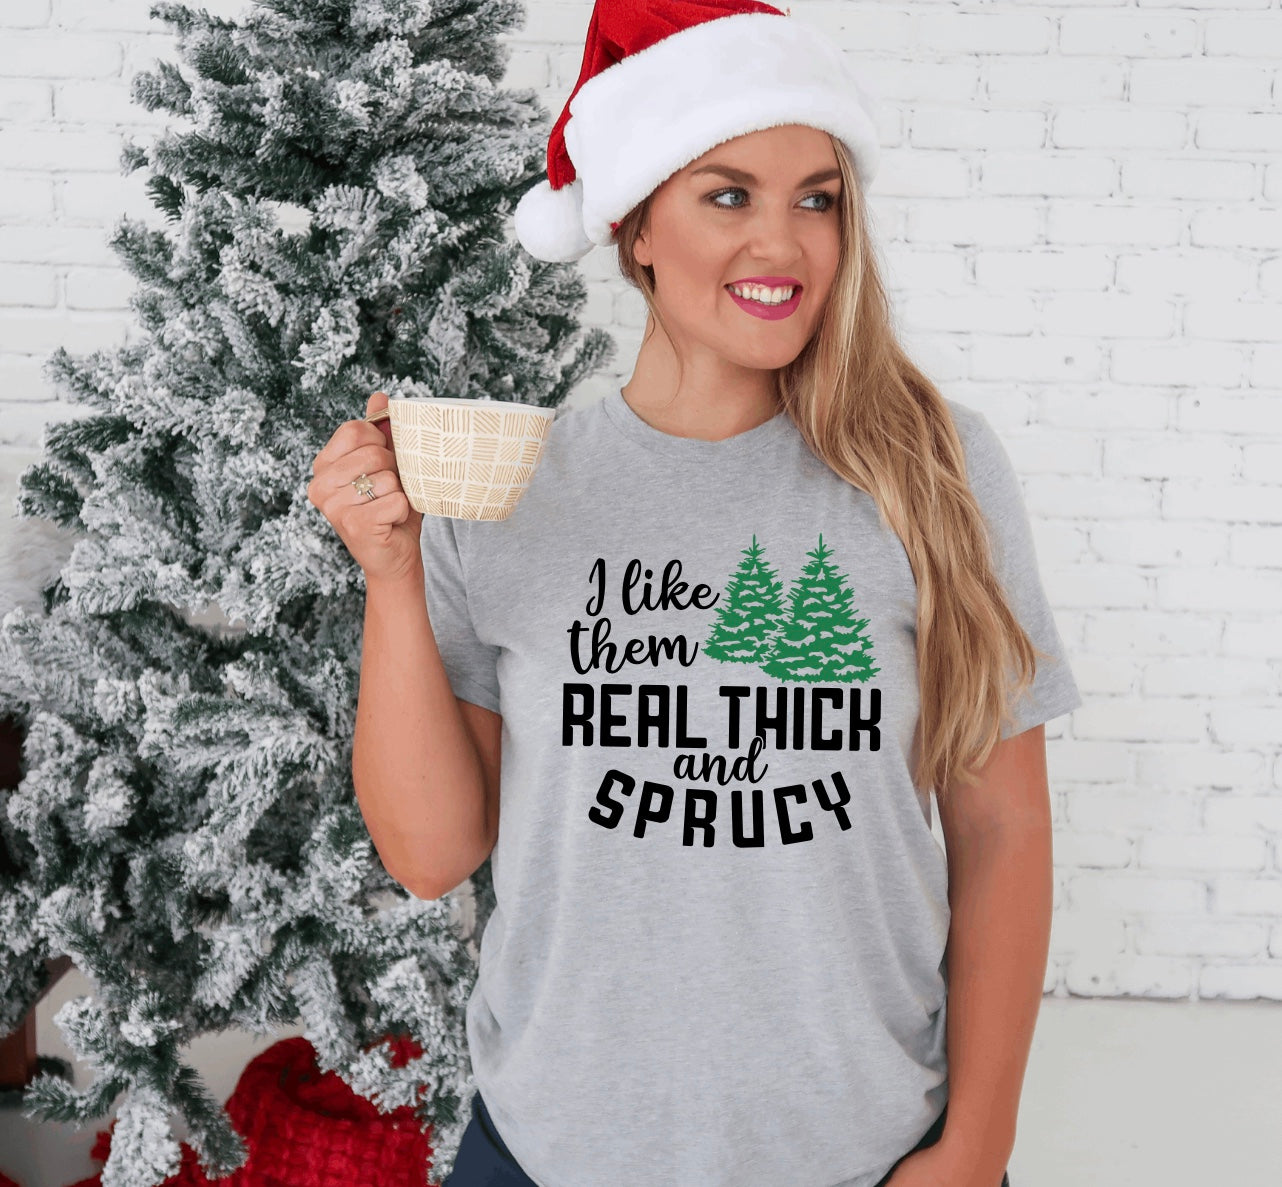 I like them real thick and sprucy unisex Christmas t-shirt for women in grey